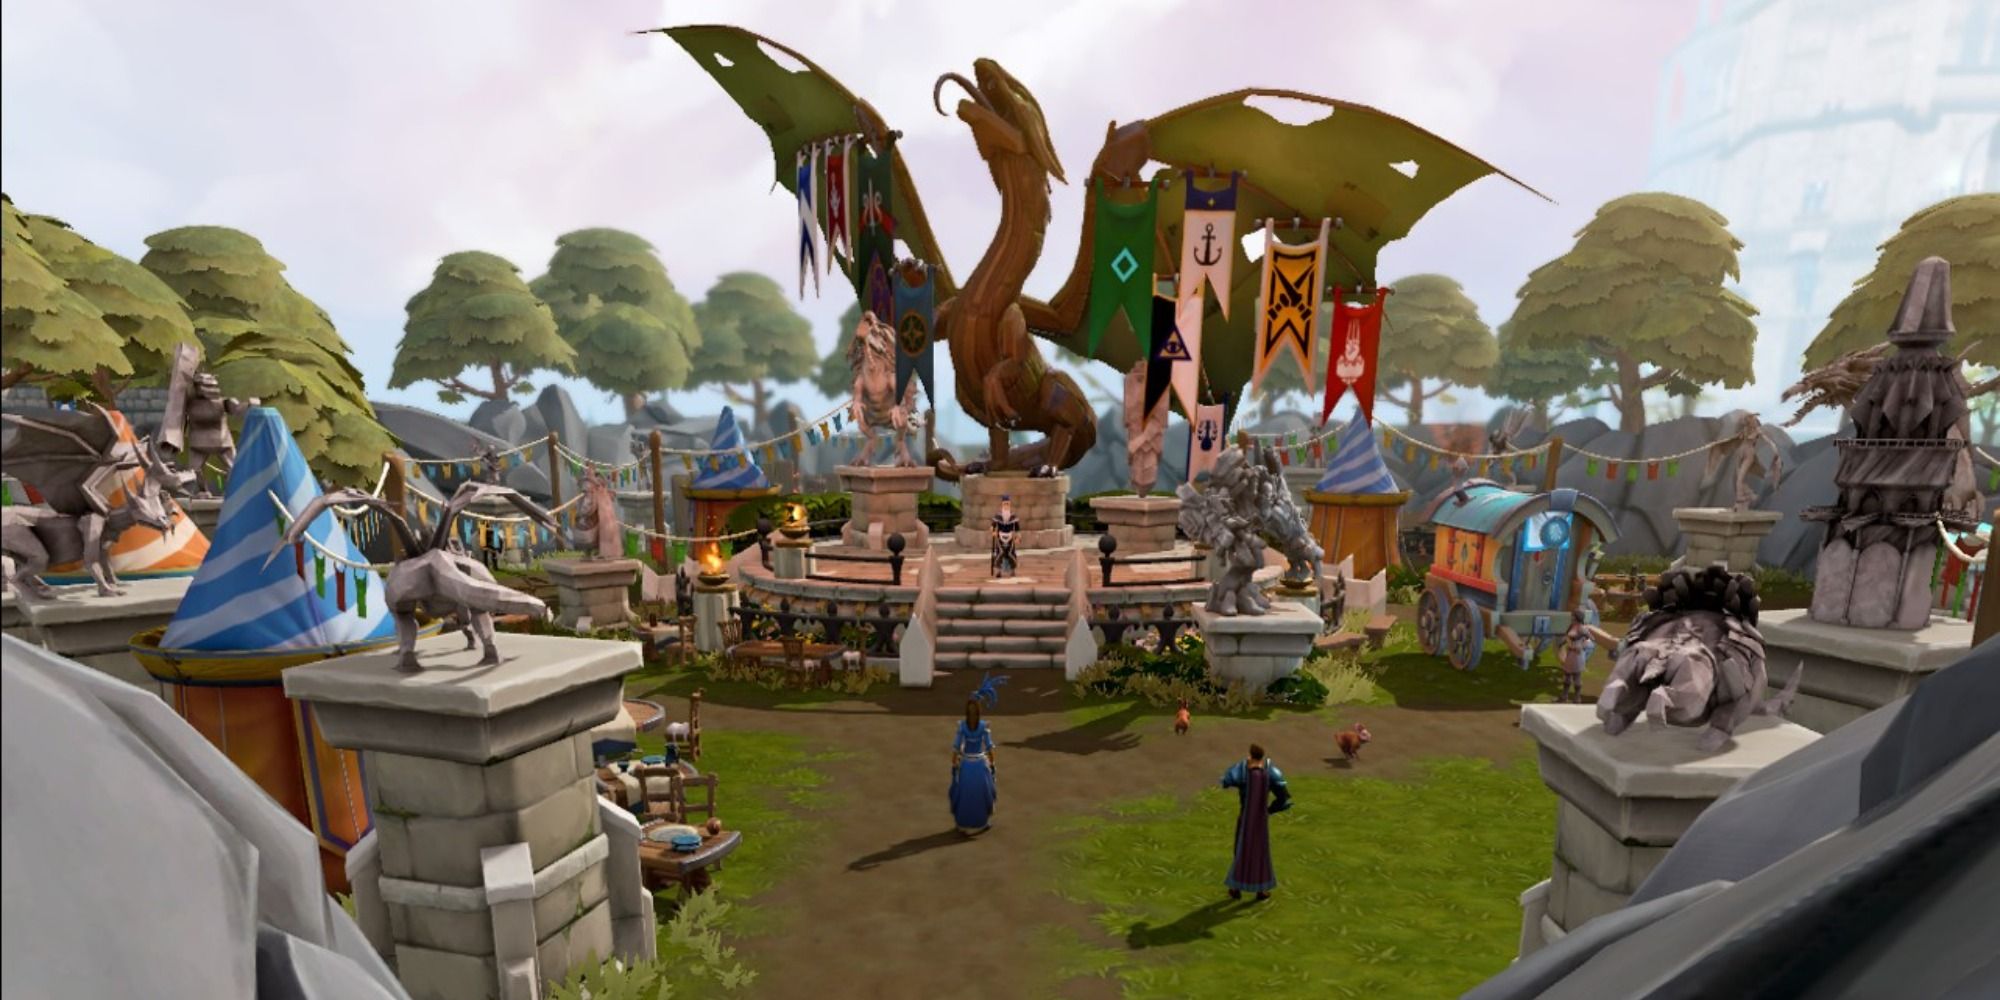 Runescape - A Bustling Town With A Dragon Statue